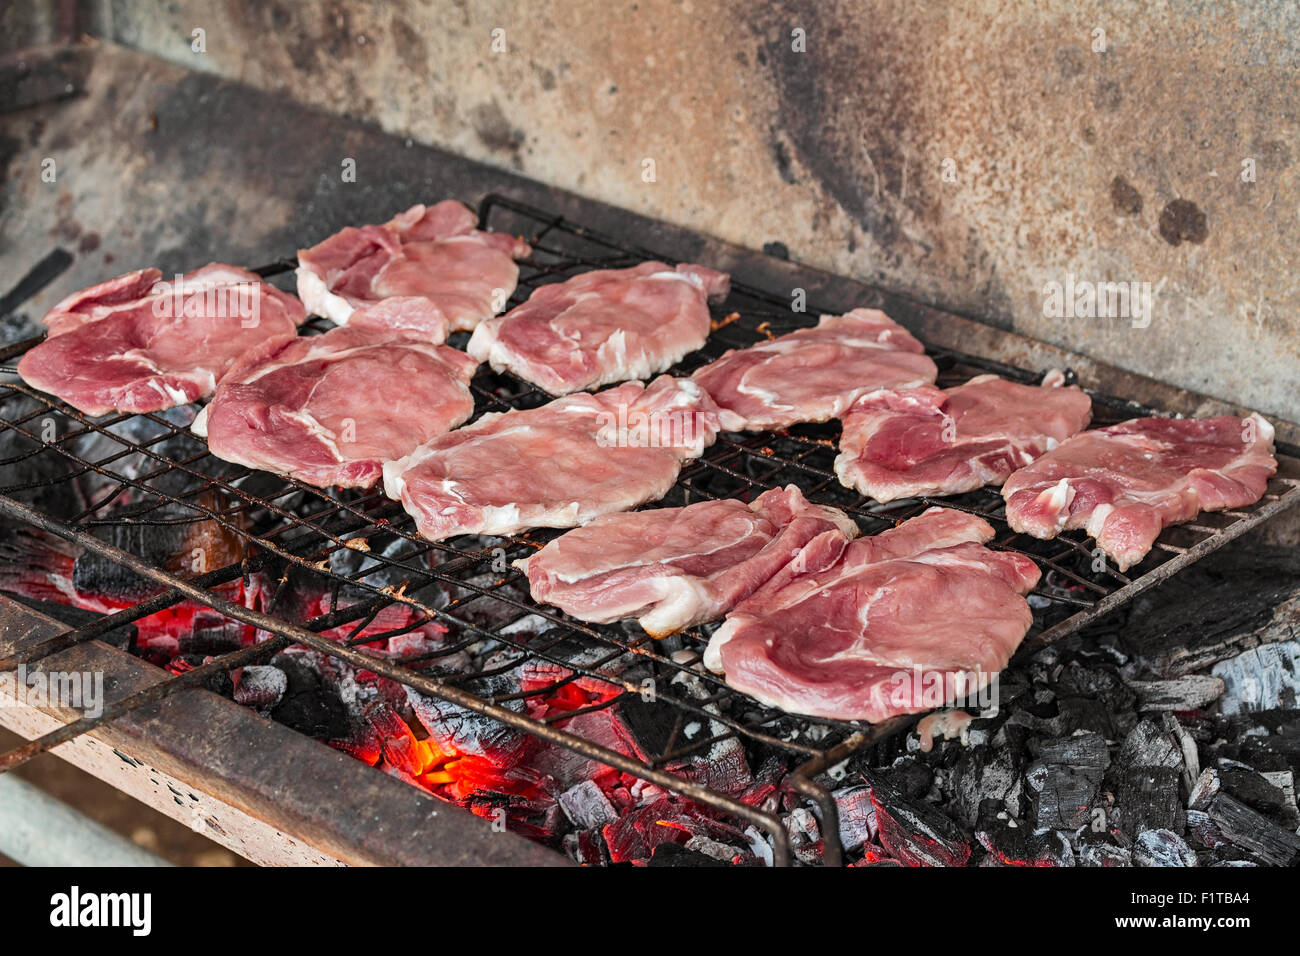 raw meat grilled over charcoal Stock Photo